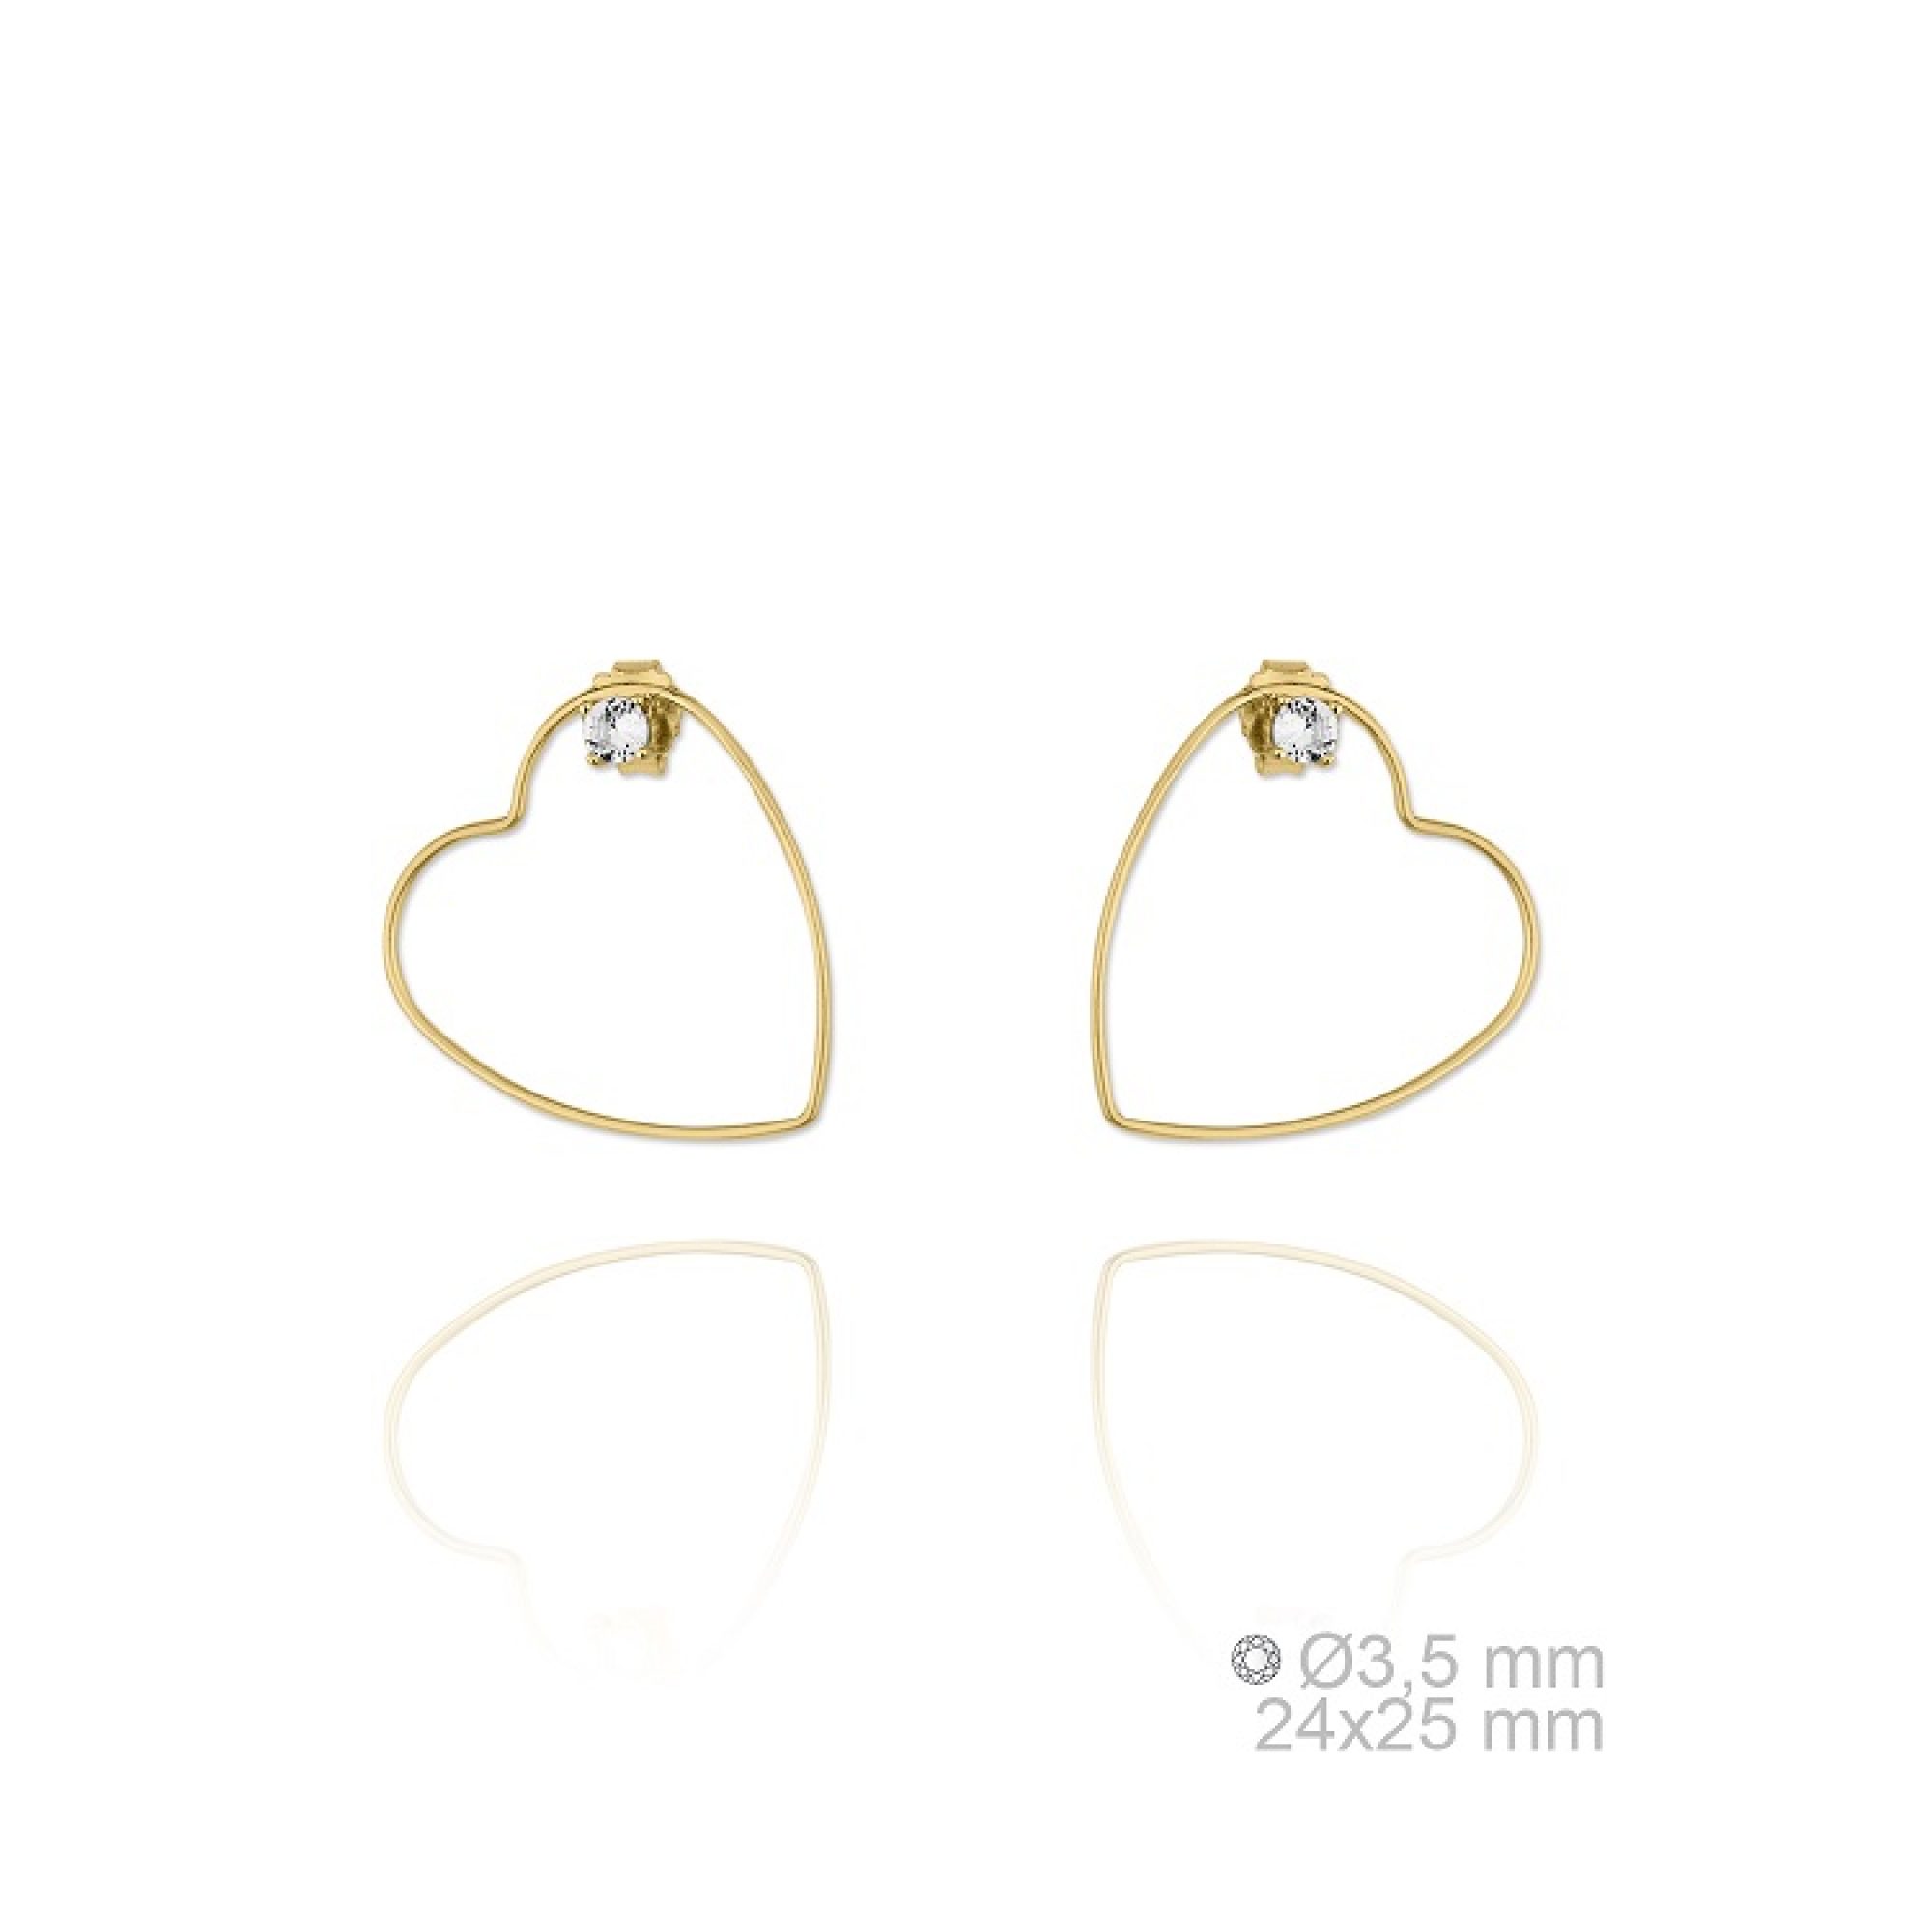 Gold plated heart shaped hoops with a zircon stone